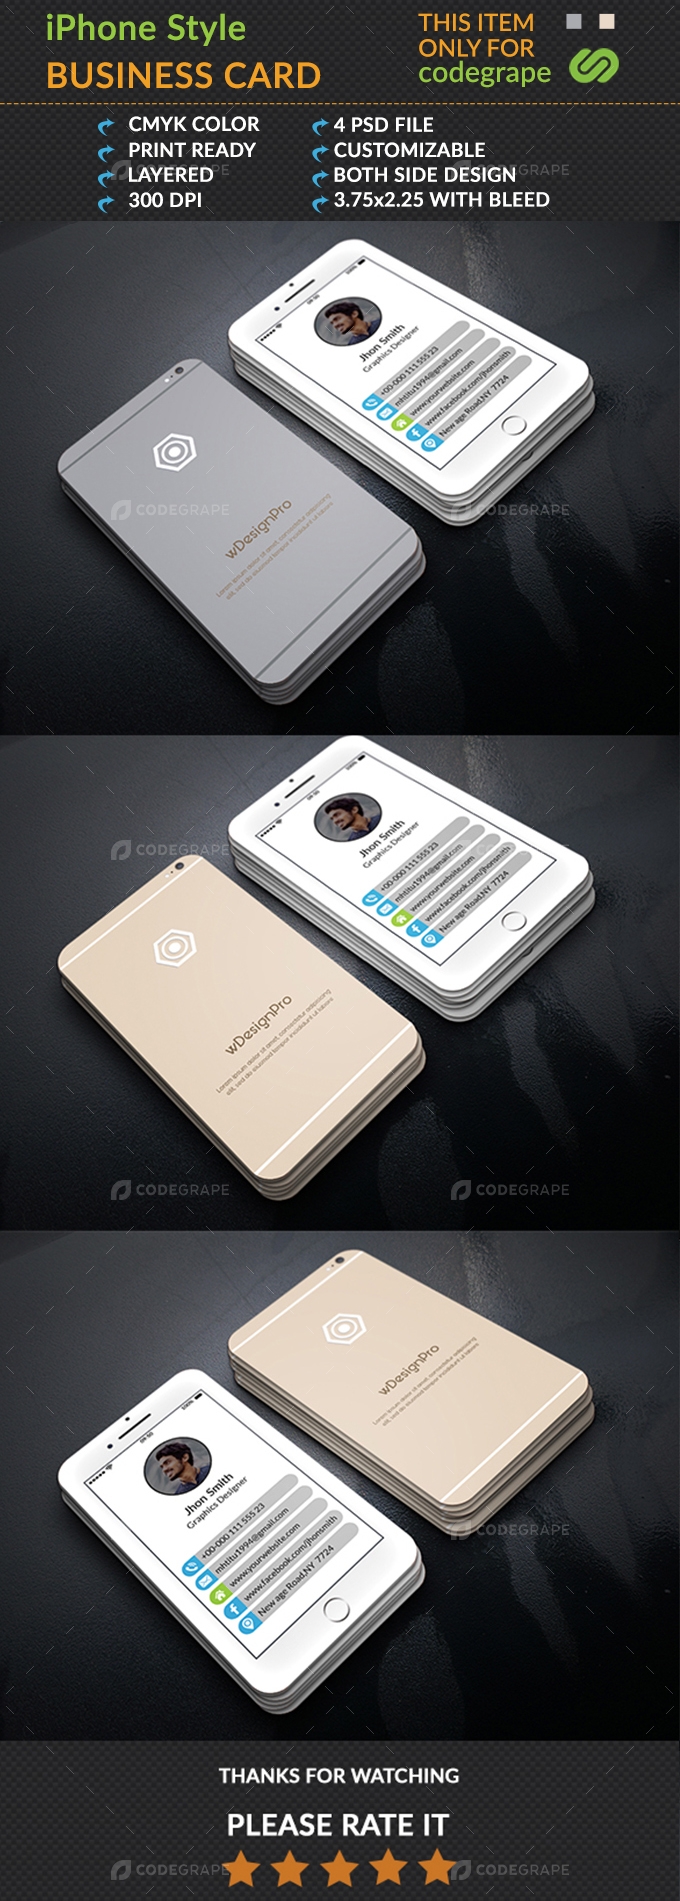 iPhone Style Business Card